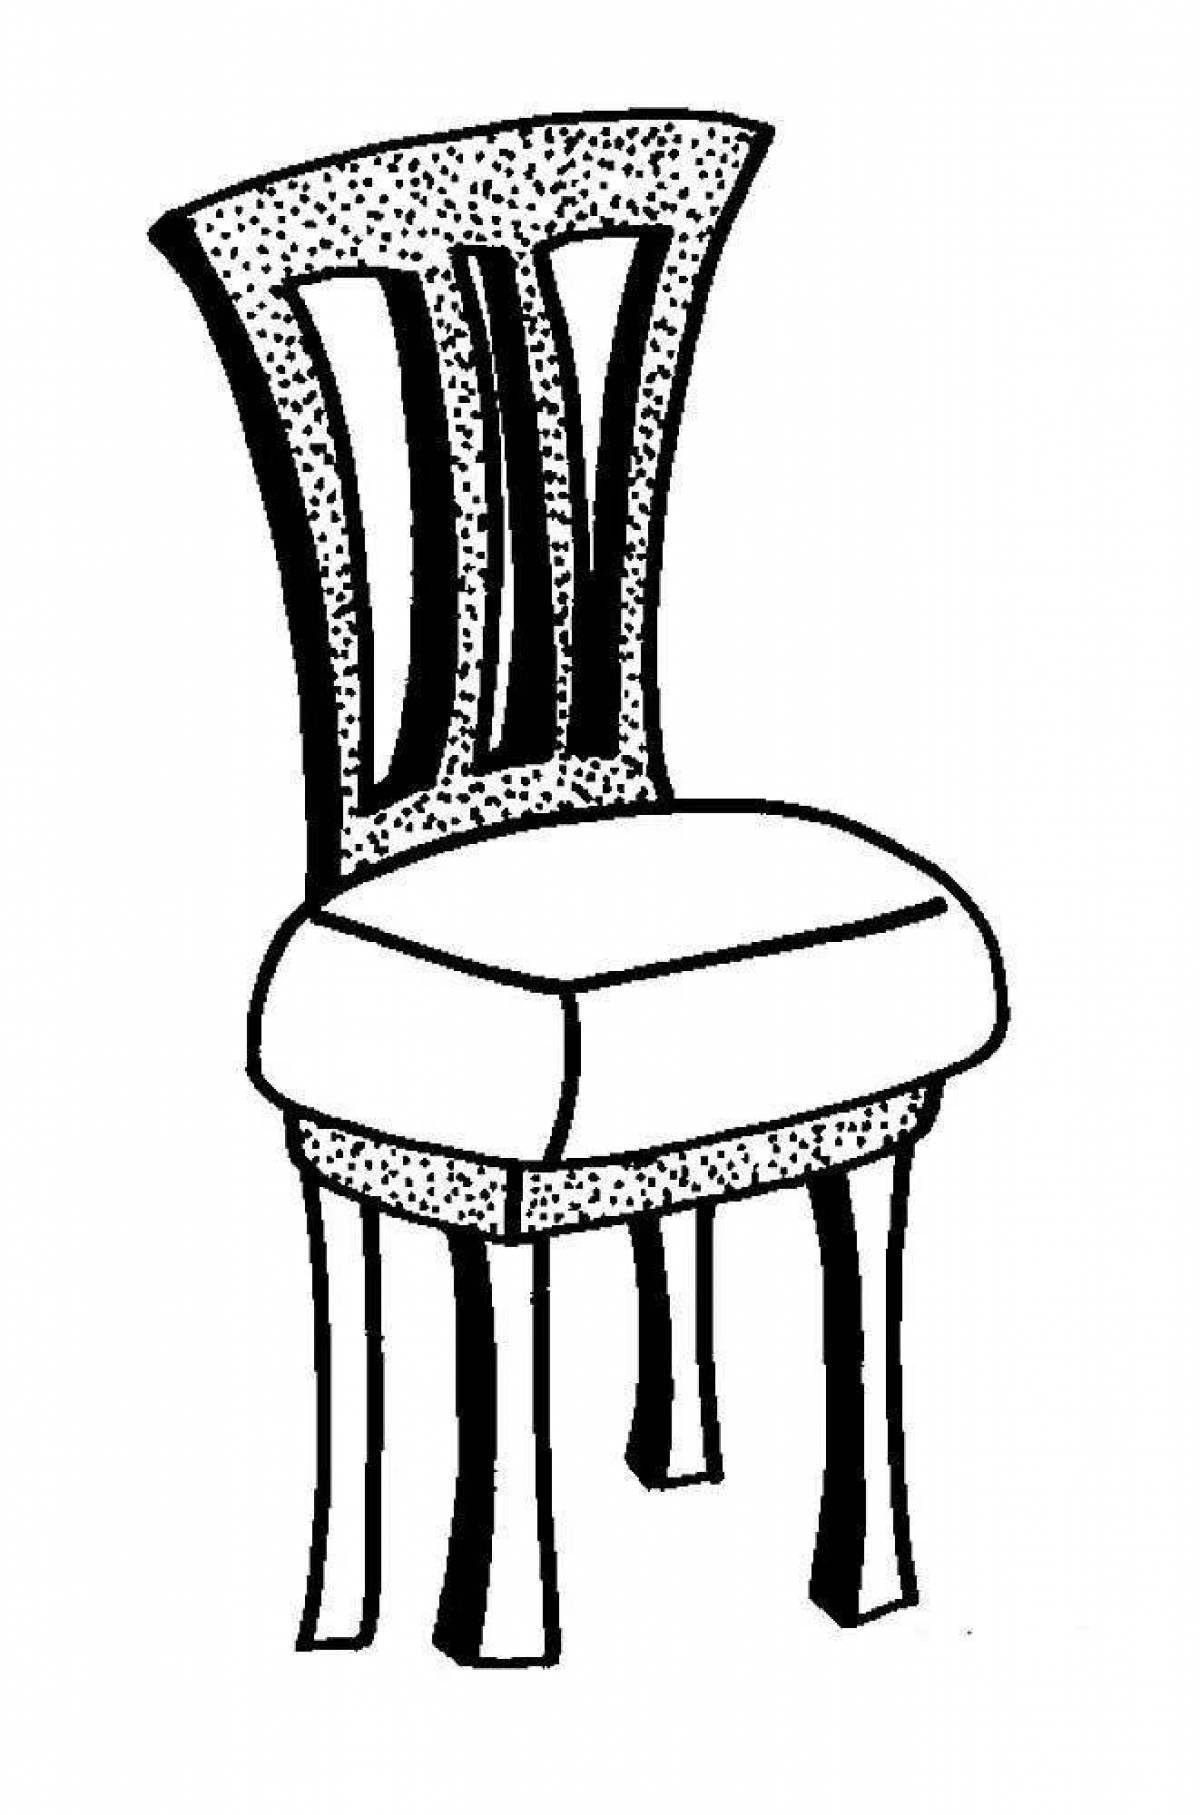 Adorable chair coloring page for kids